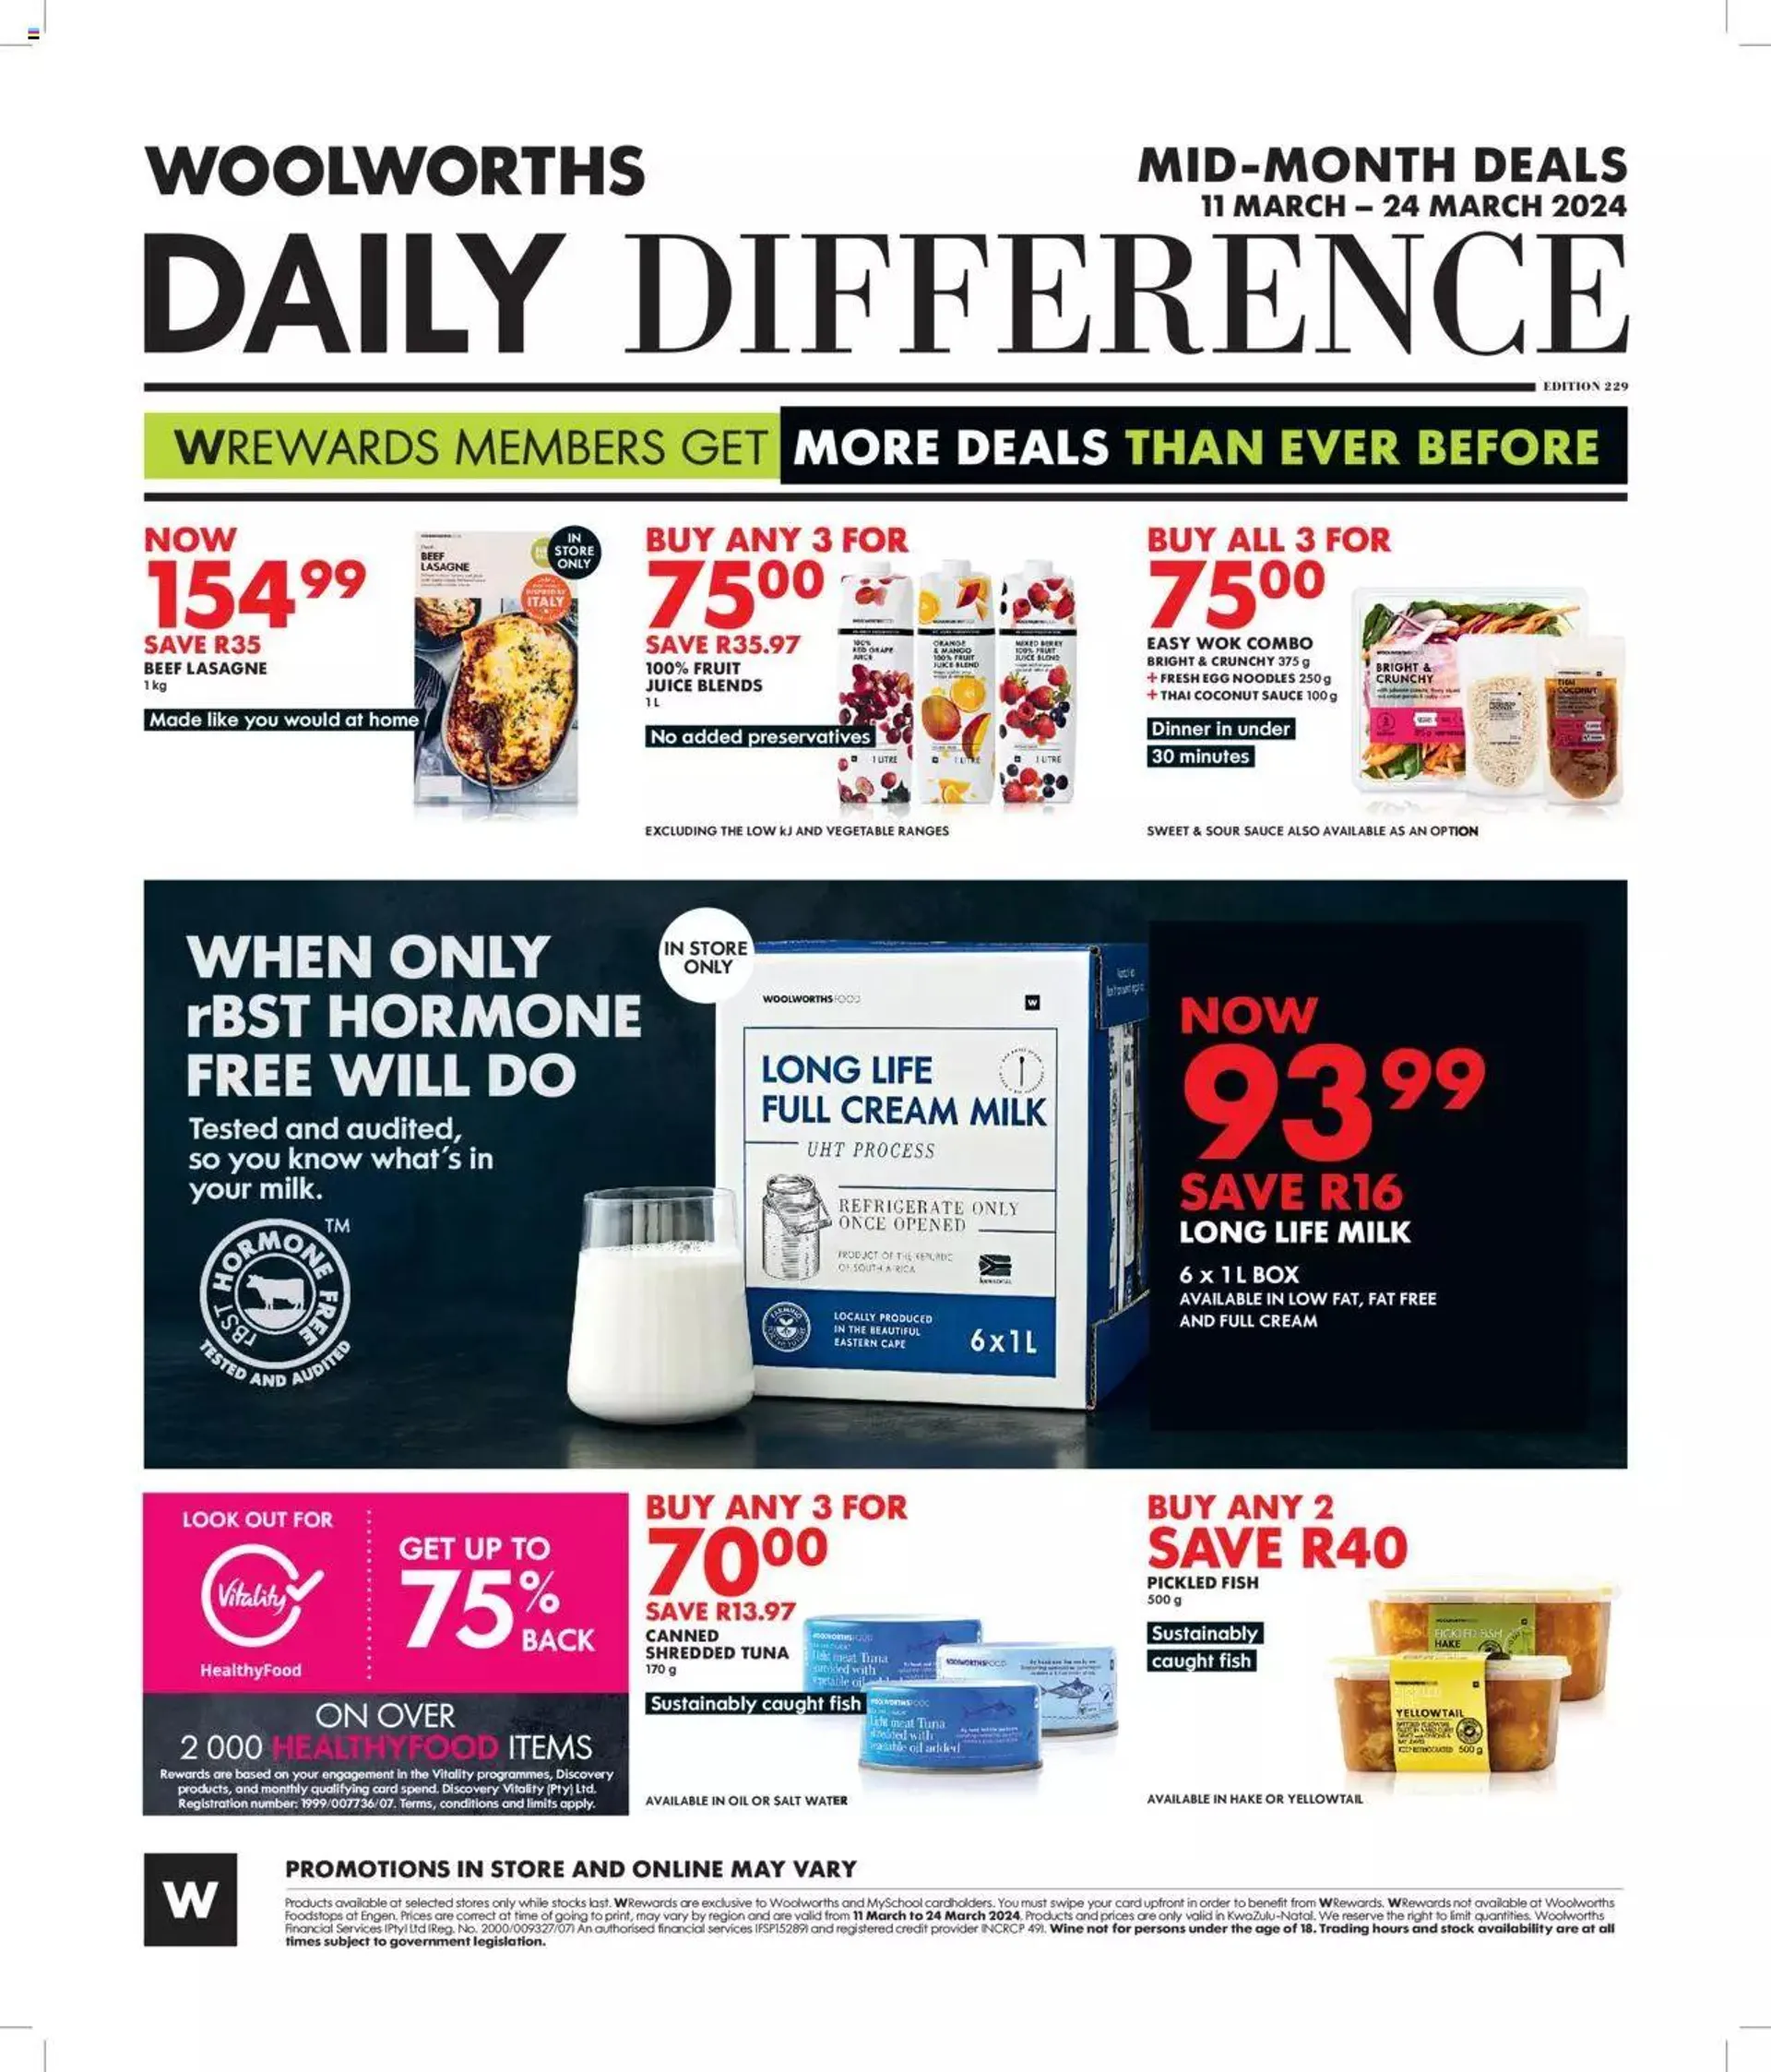 Woolworths Daily Difference - KwaZulu-Natal - 11 March 24 March 2024 - Page 8